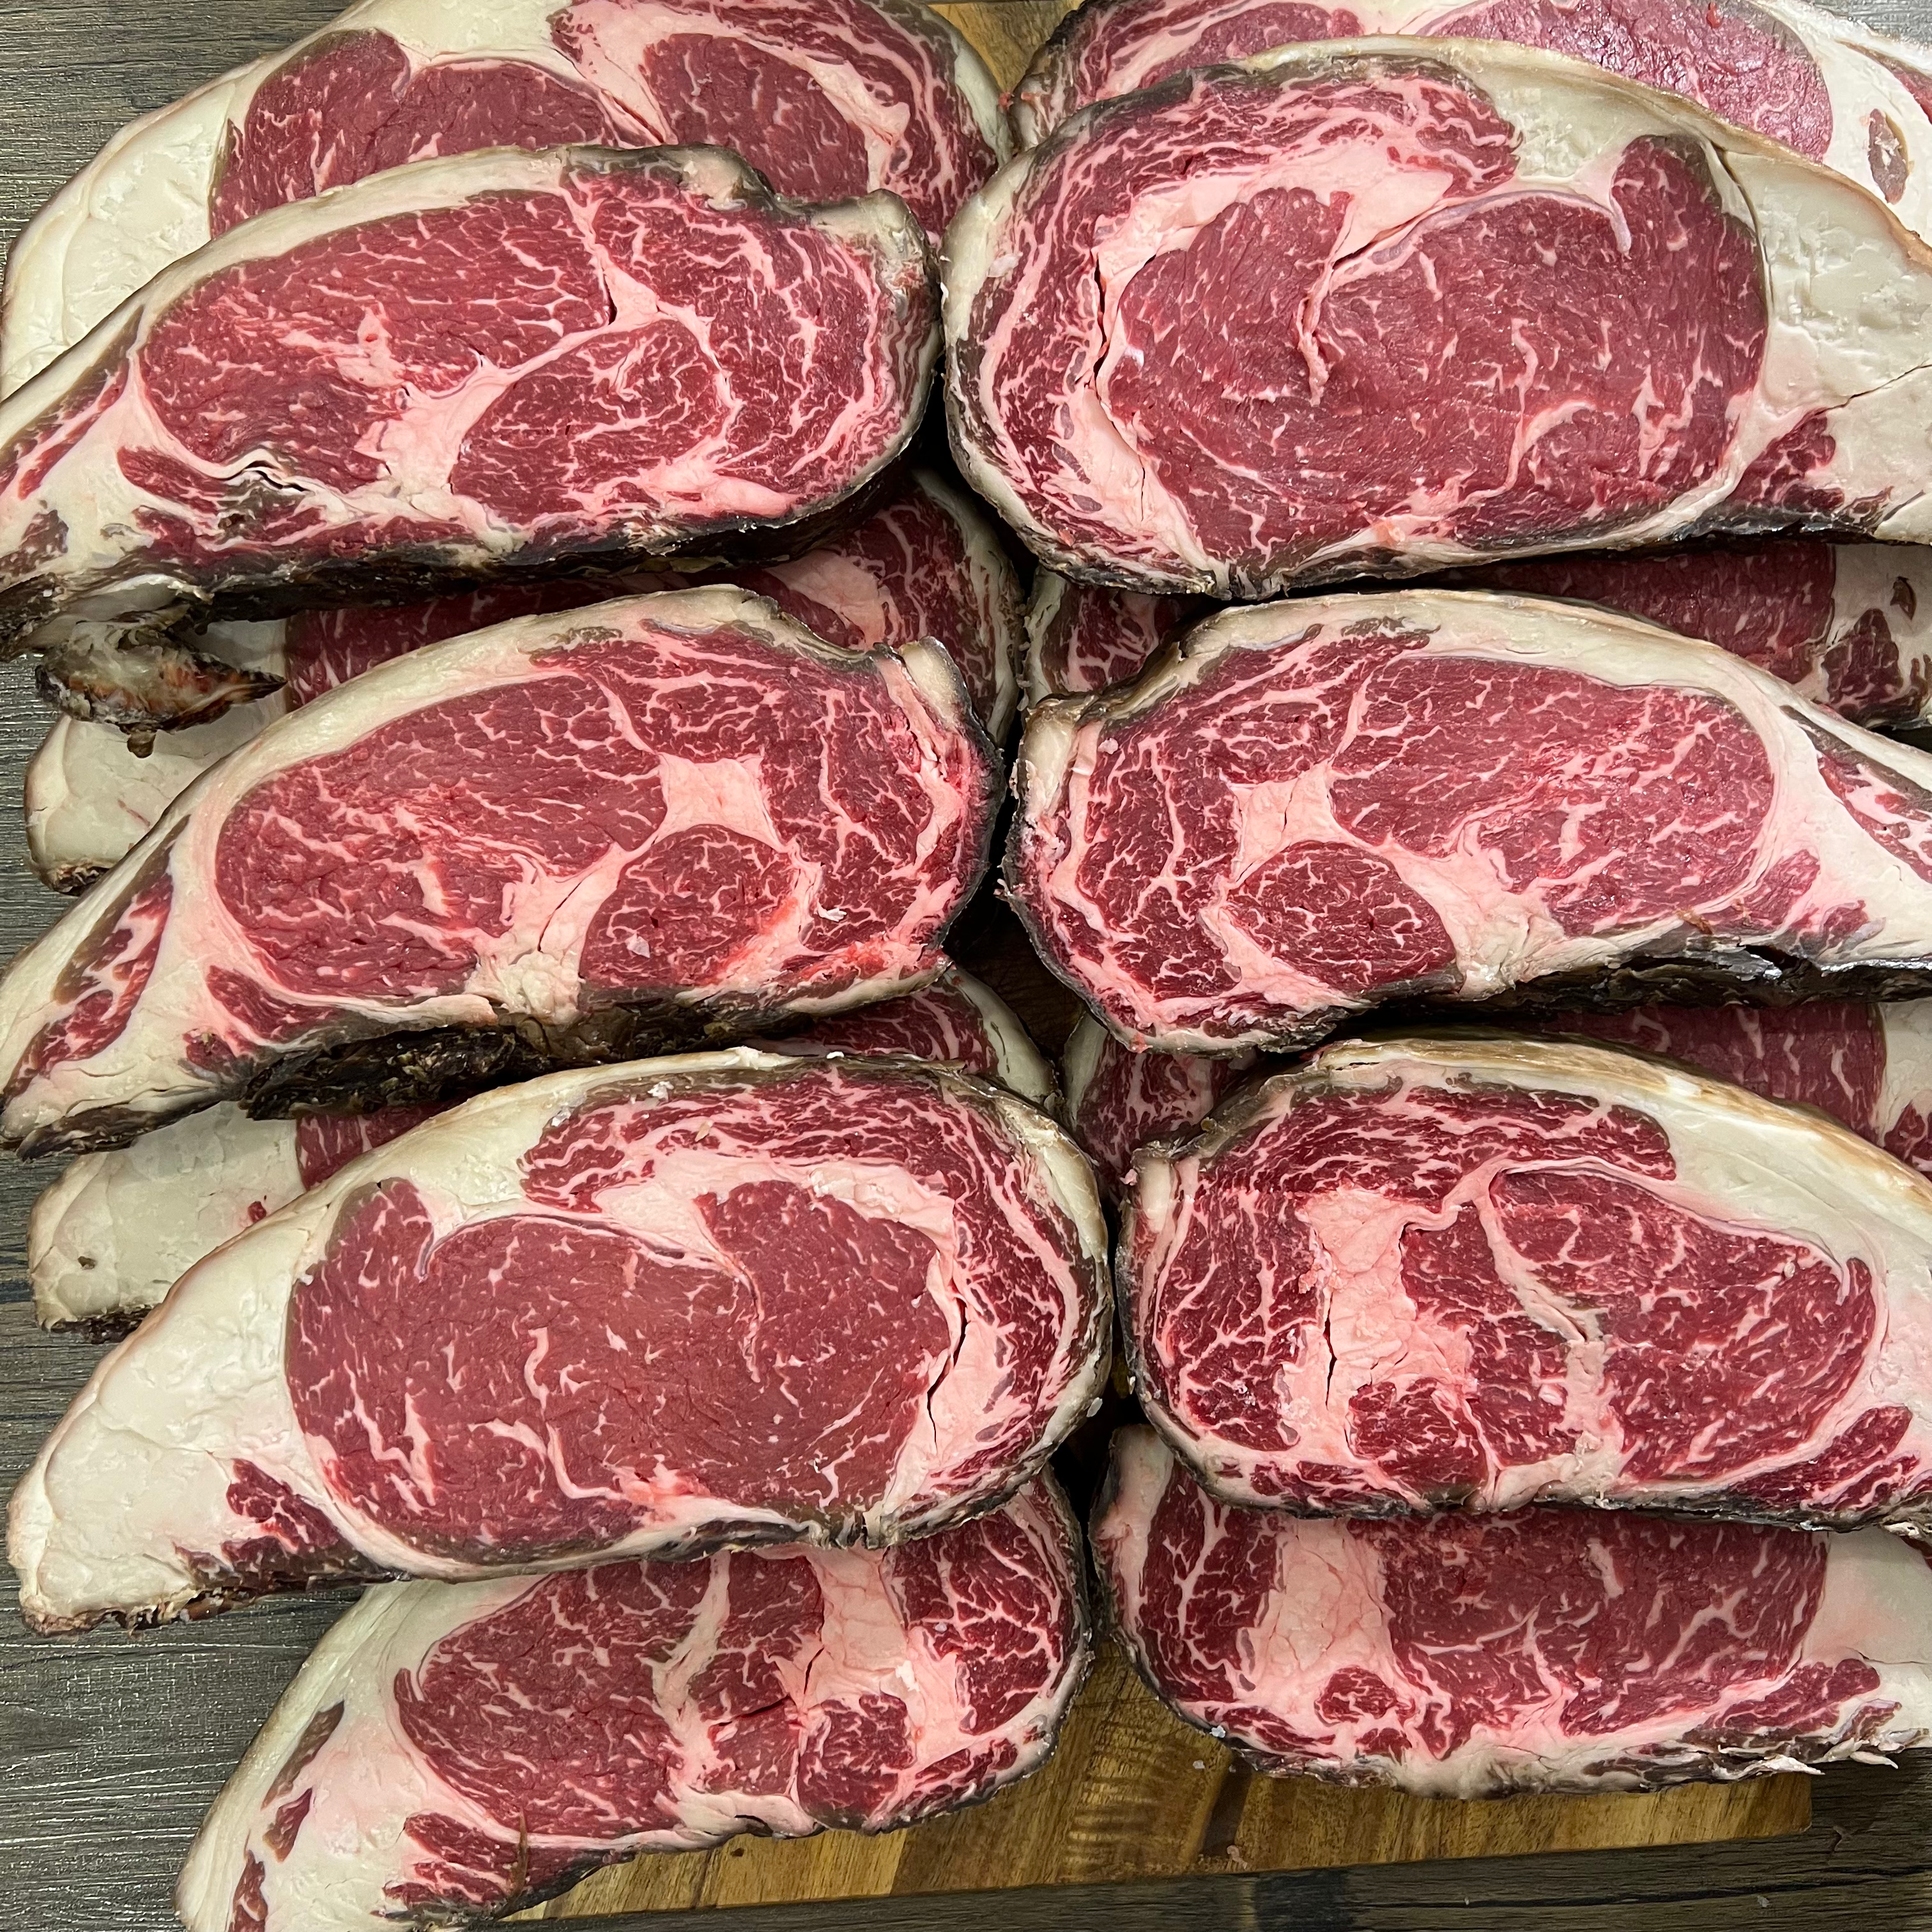 [Sold Out] 21 Days Dry Aged Ribeye Steak [USDA Prime] 